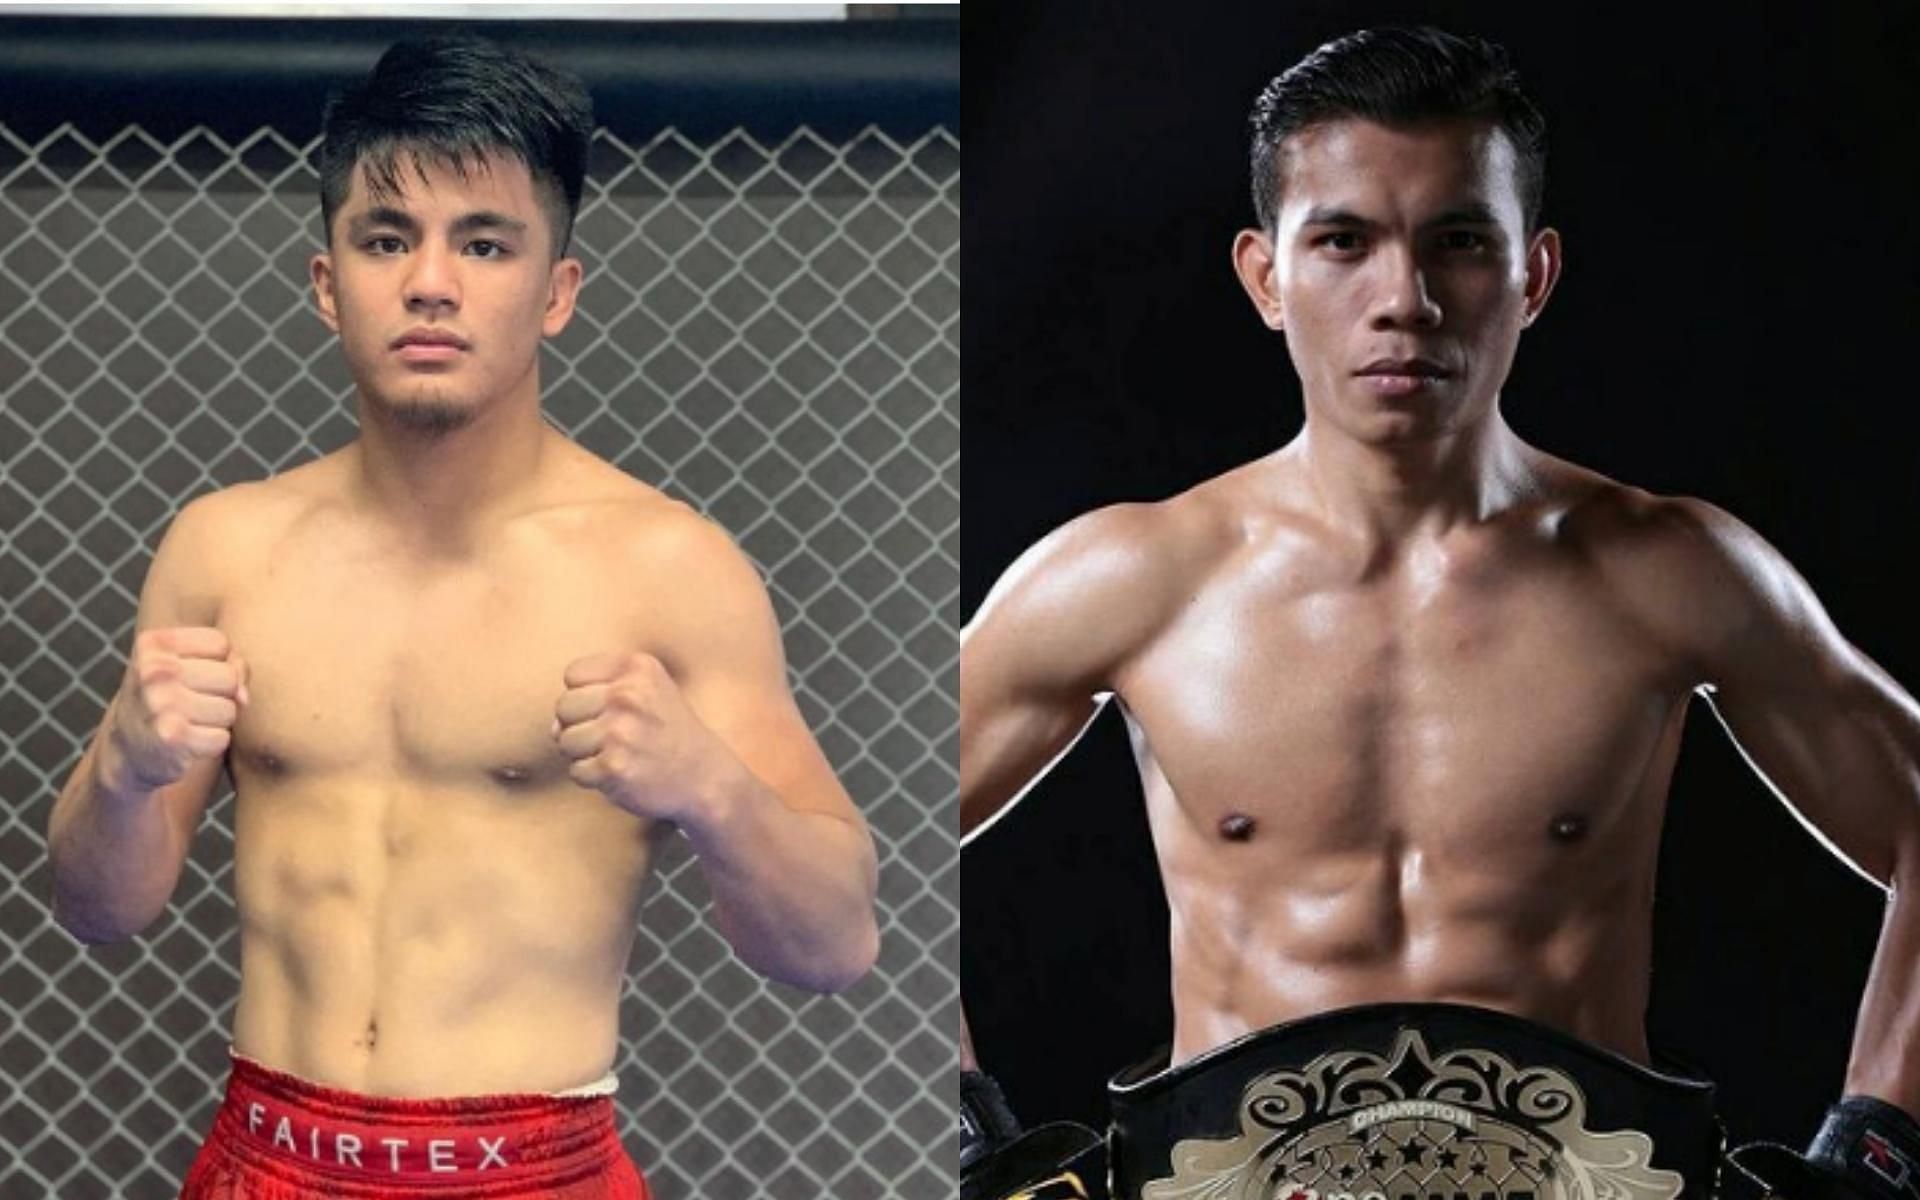 Jhanlo Sangiao (left) and Paul Lumihi (right) will open the main card of ONE Championship: Winter Warriors II. (Images Courtesy: @itsjhanlo and @paul_lumihi on Instagram)